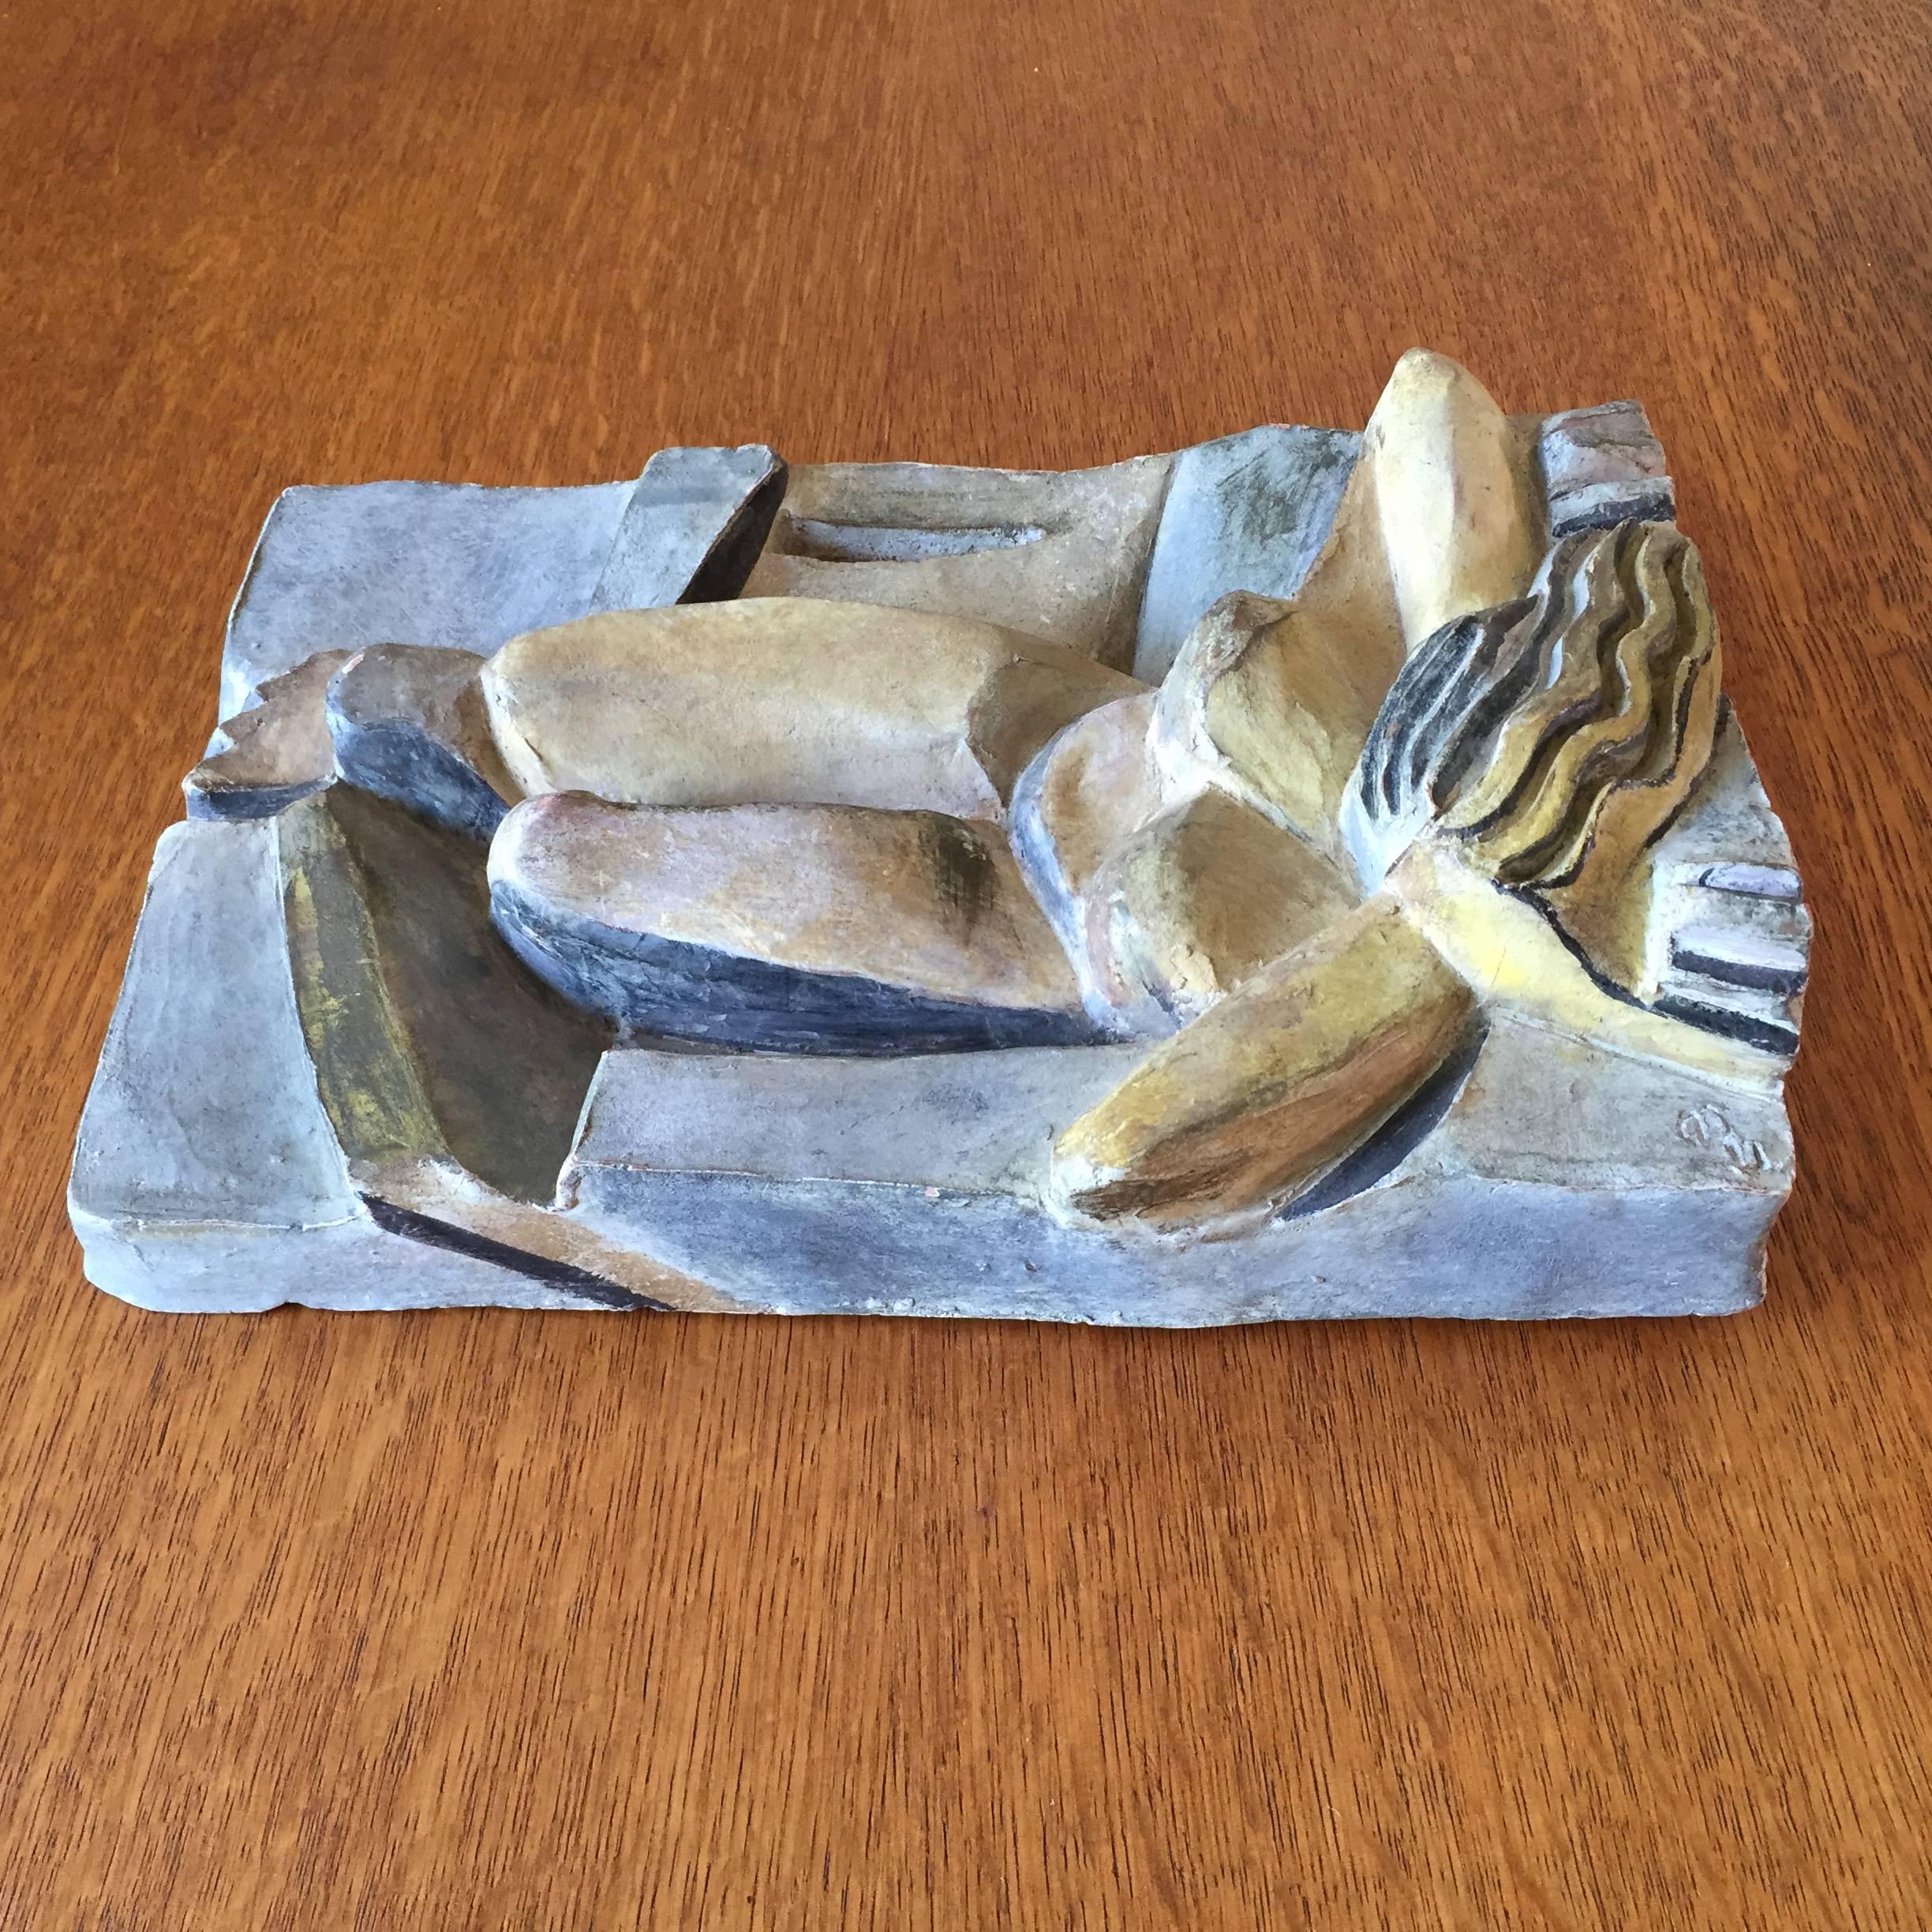 Very interesting signed rectangular cubist terracotta relief of a reclining woman with hand-painted finish (unglazed) the monogram looks like "GB" or "CB. The work has the handling of a very competent artist and demands more research,